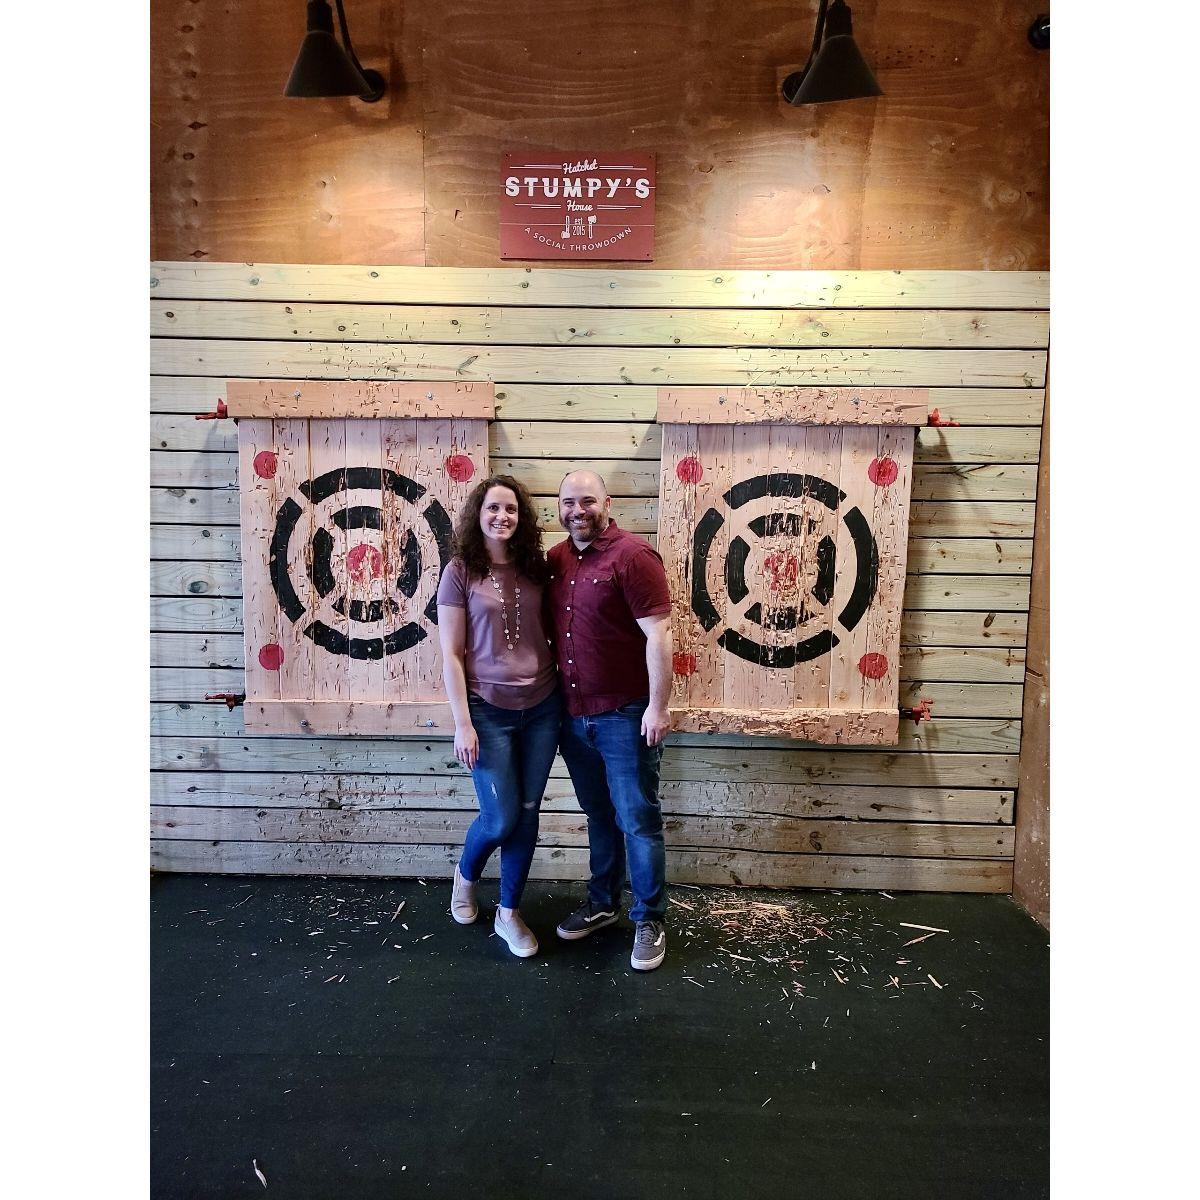 The first picture we took together...axe throwing!